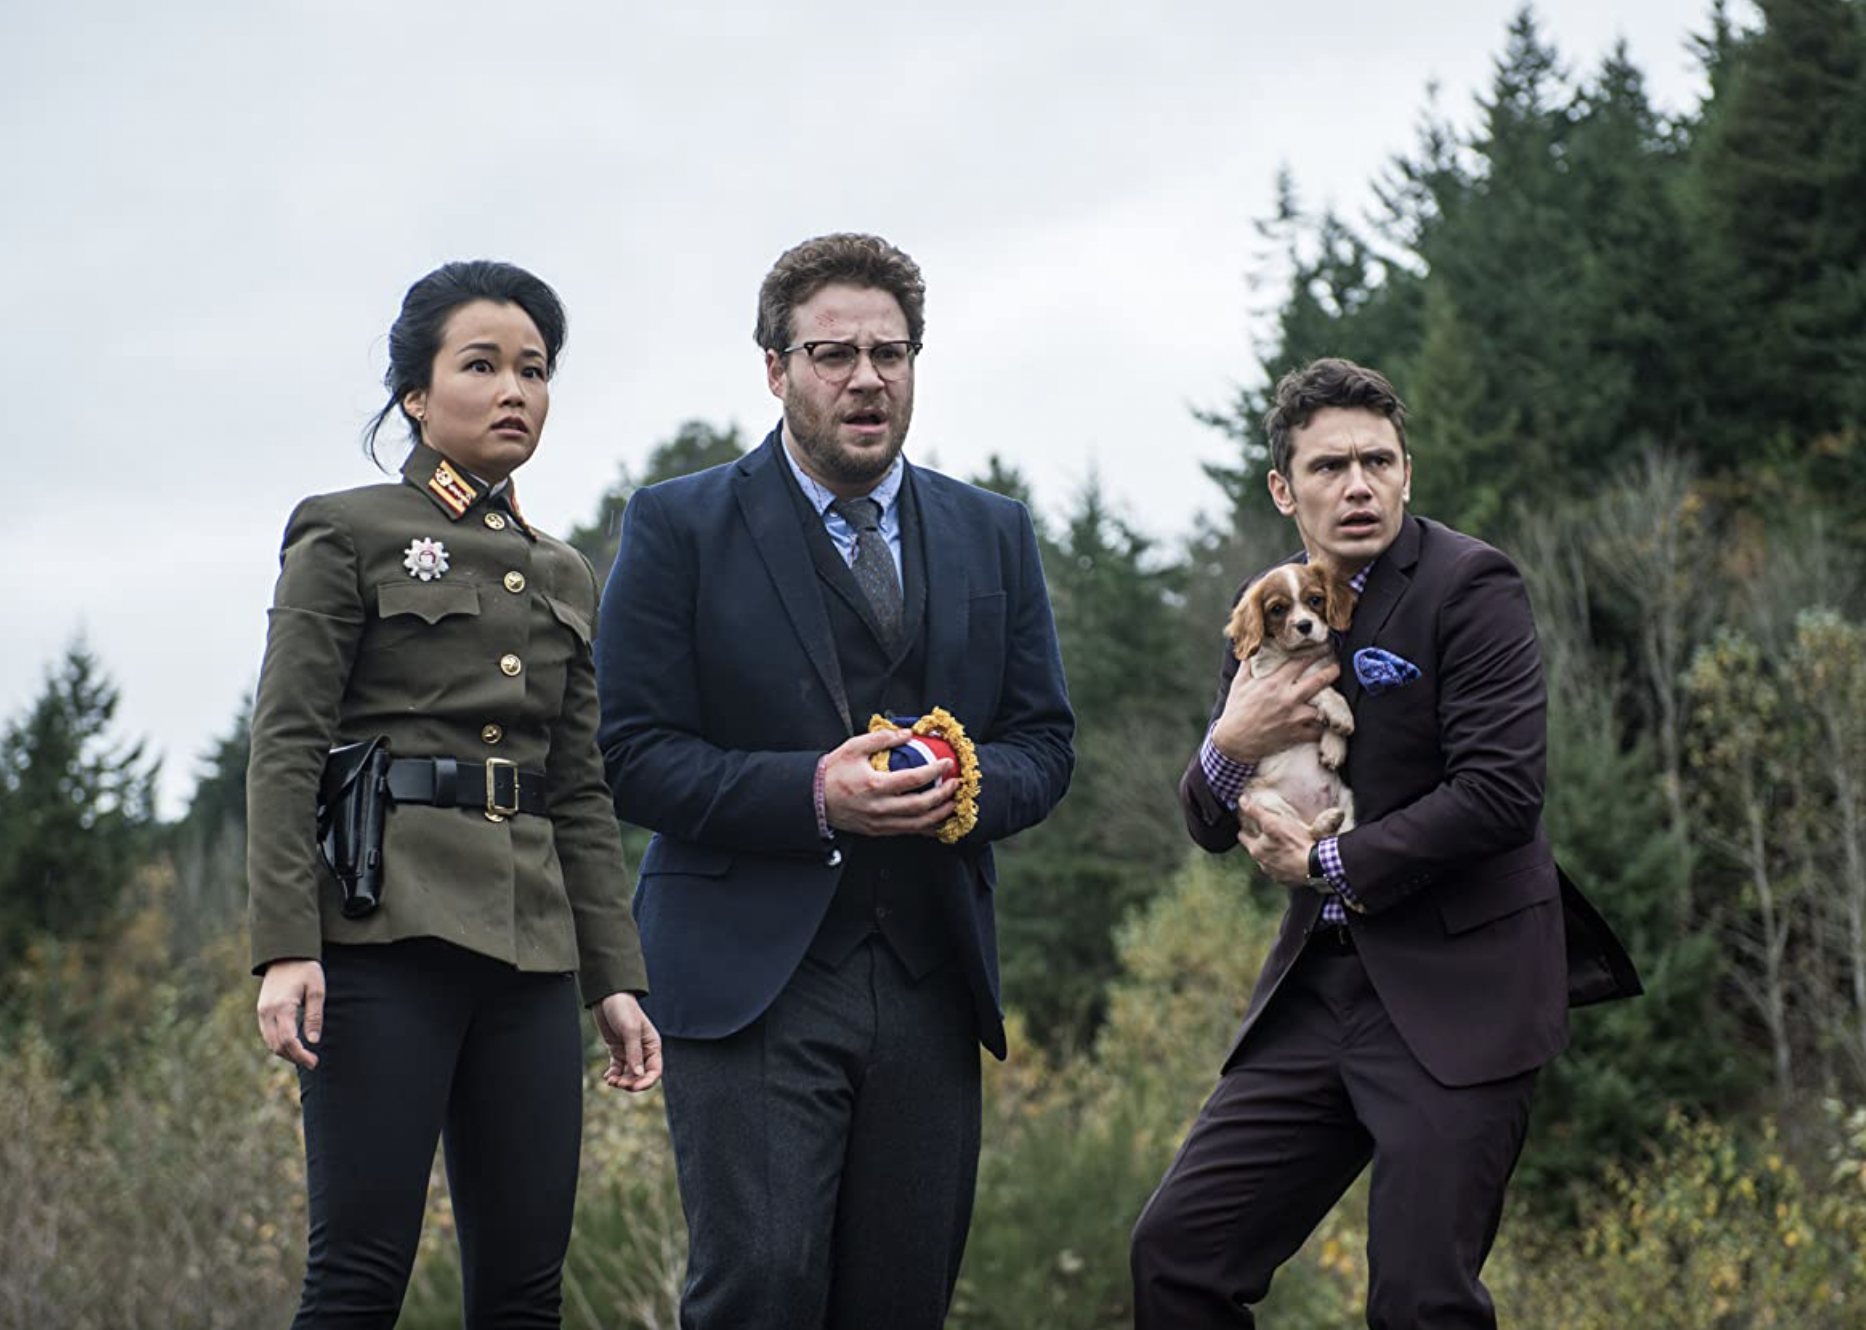 James Franco, Seth Rogen, and Diana Bang in "The Interview".